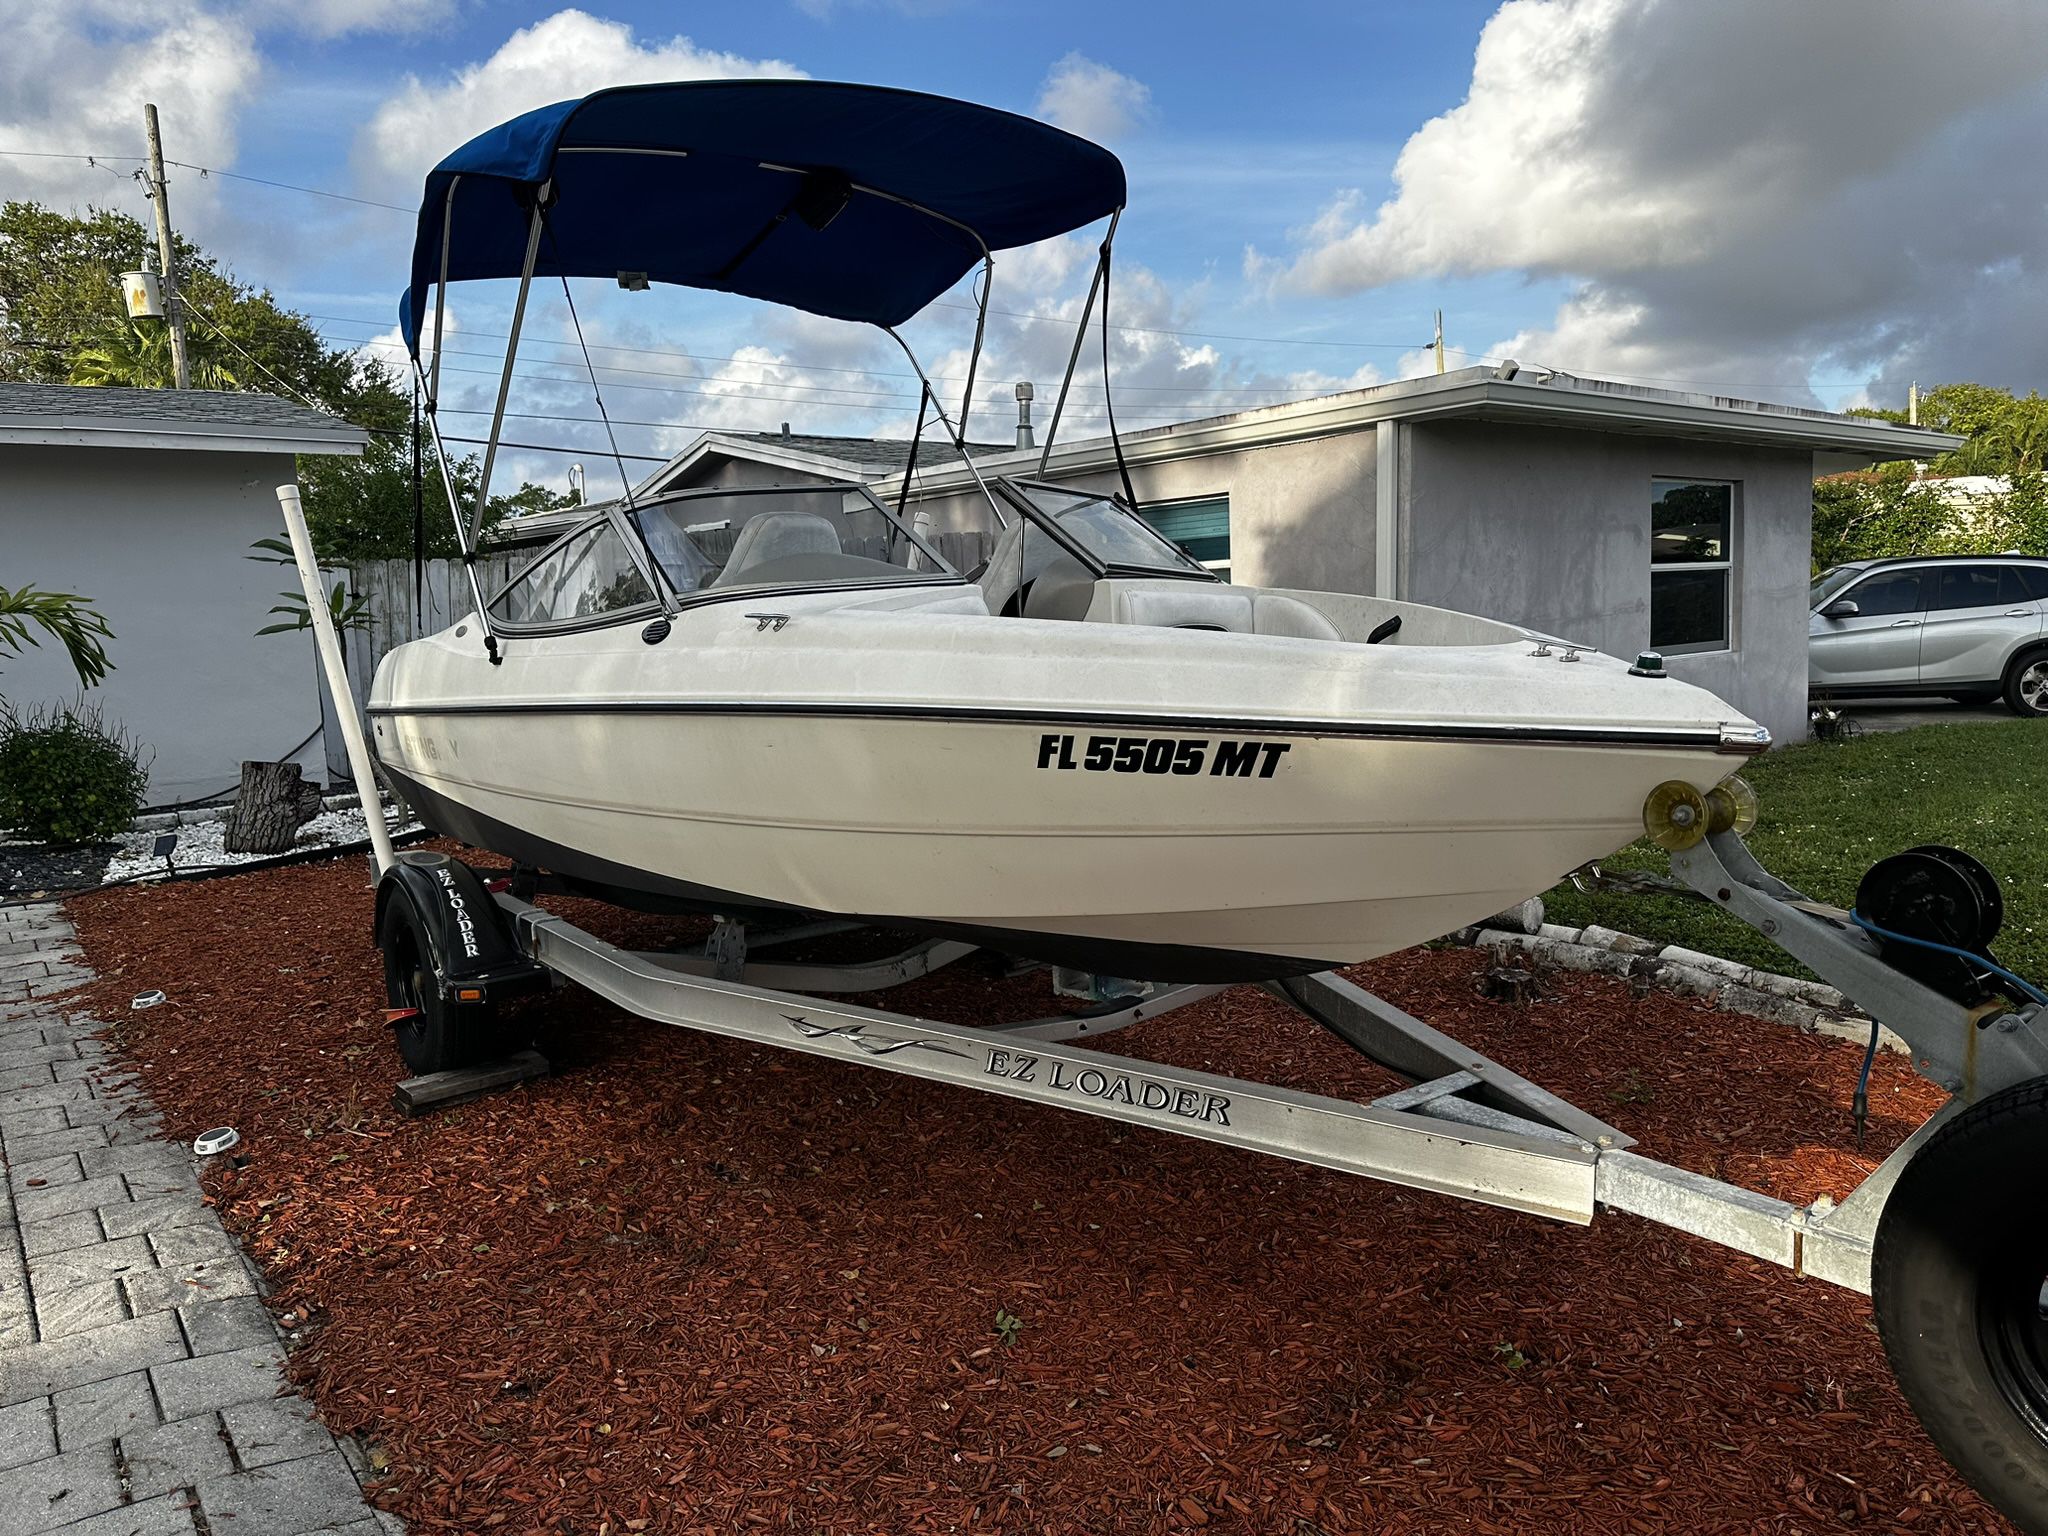 2005 Sting Ray  18ft Boat